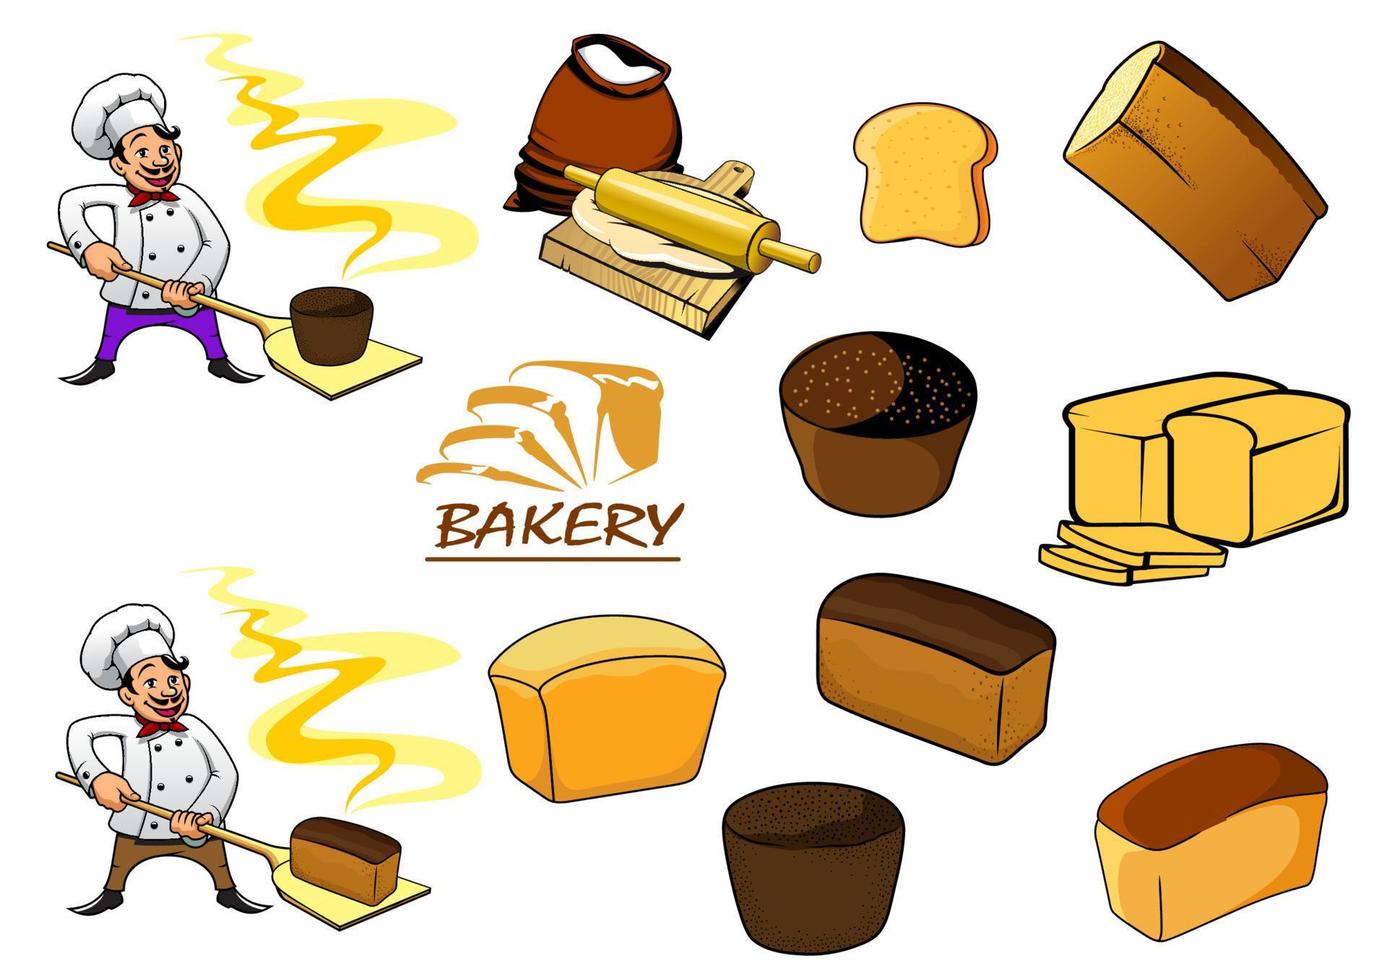 Bakery icons in cartoon style vector